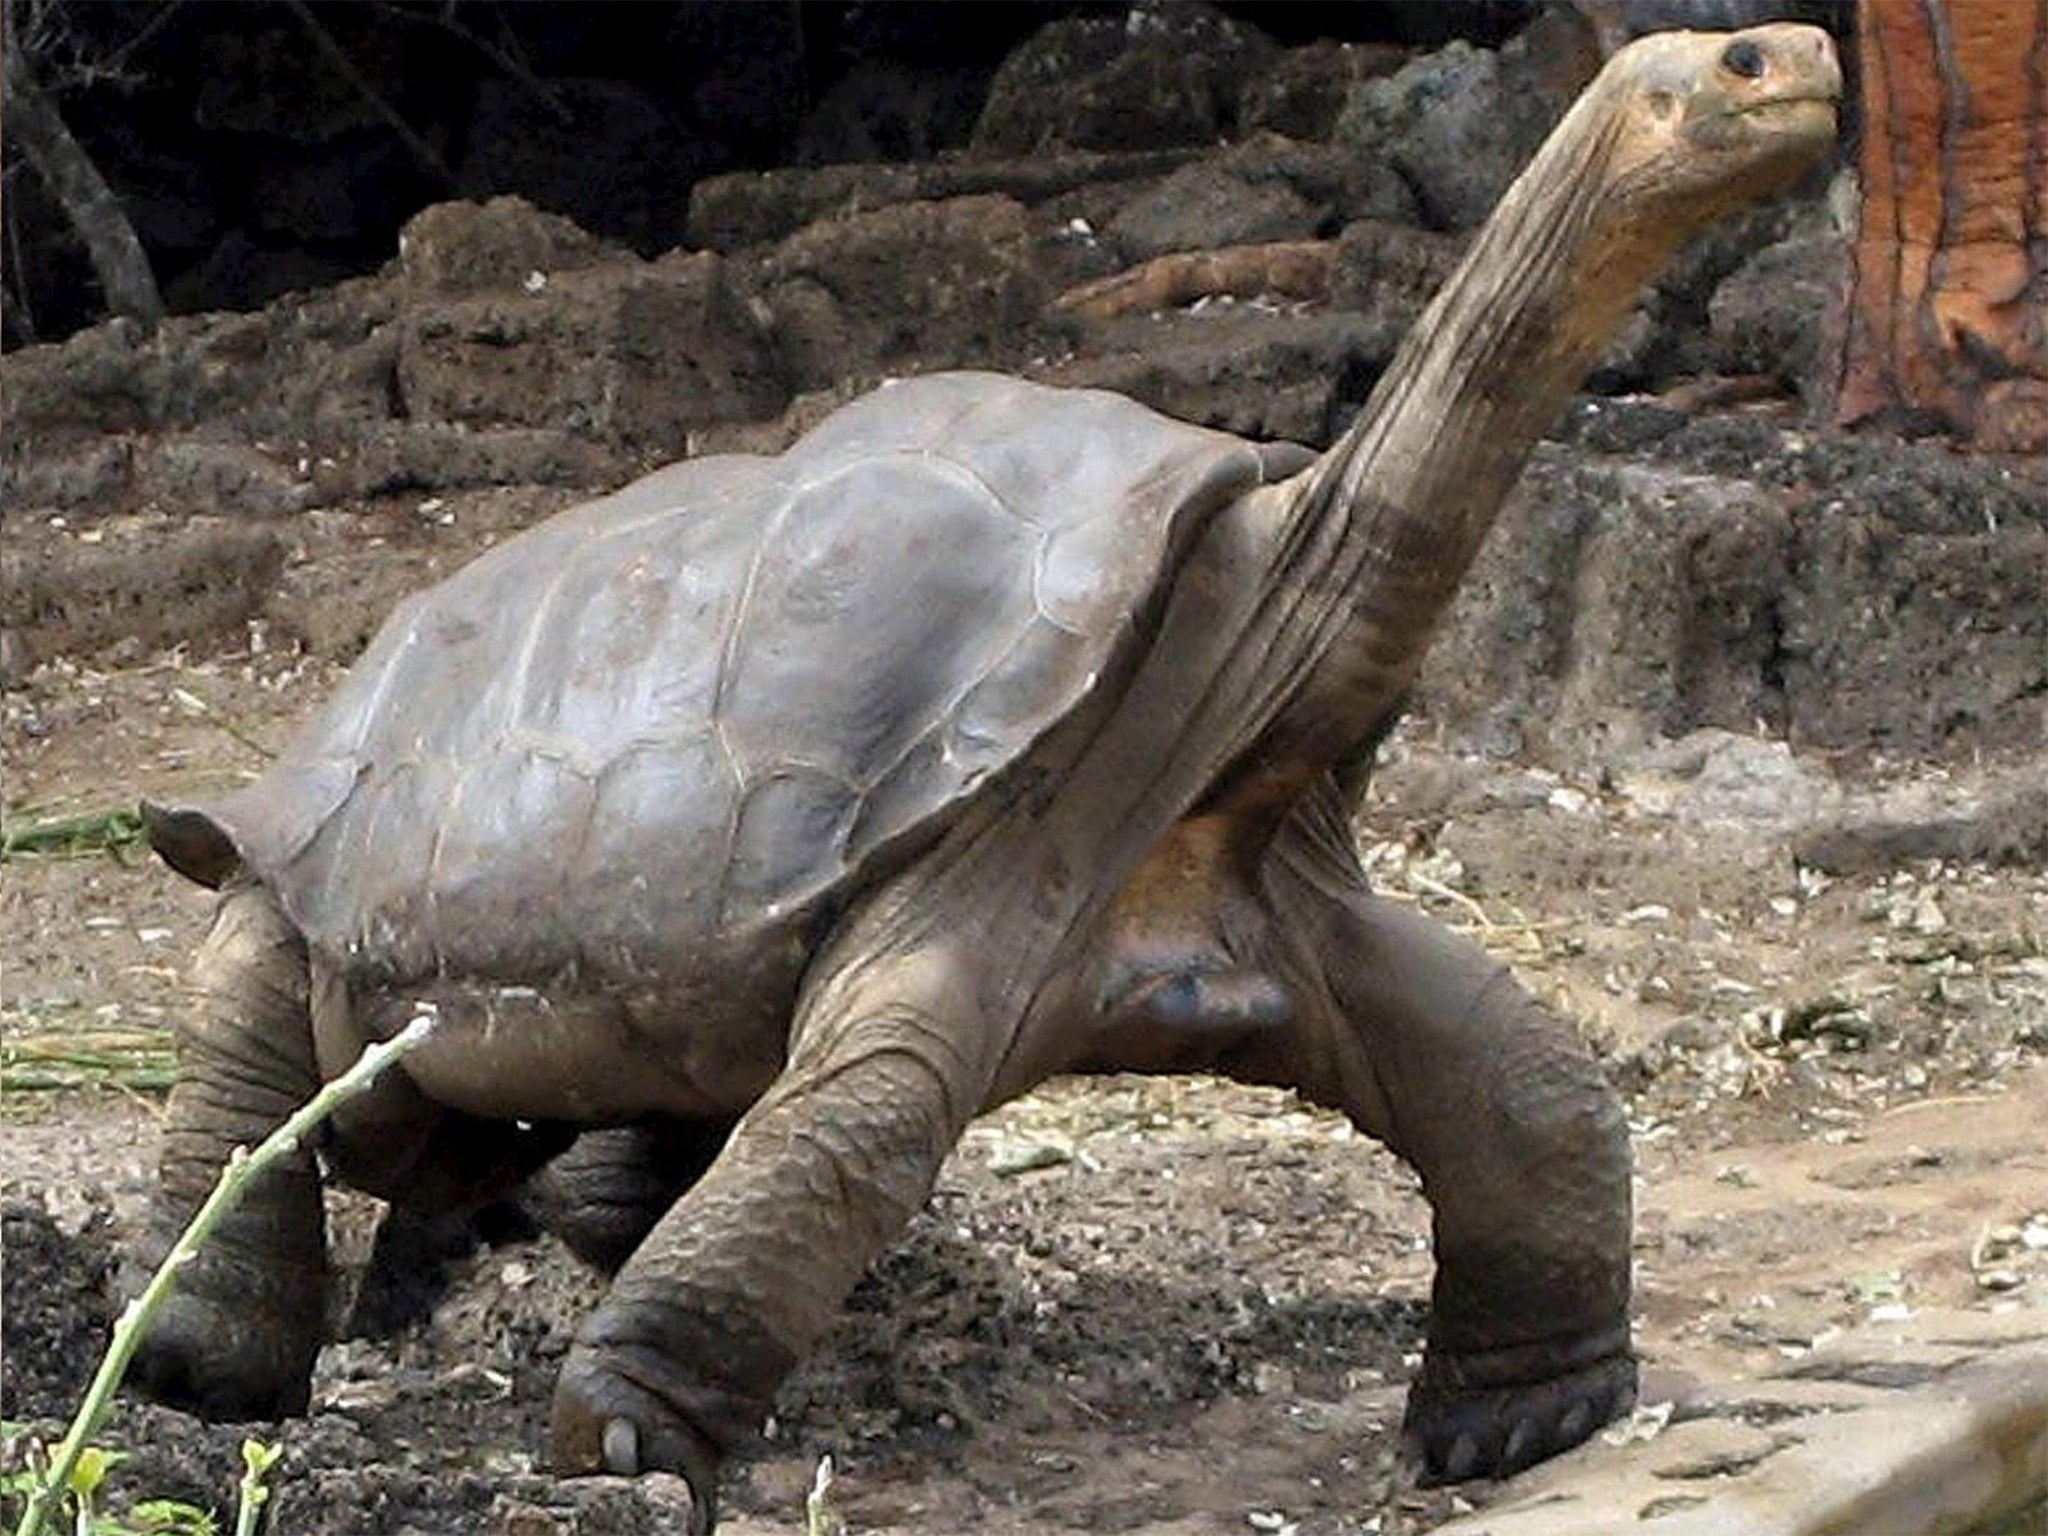 Lonesome George before his death in 2012